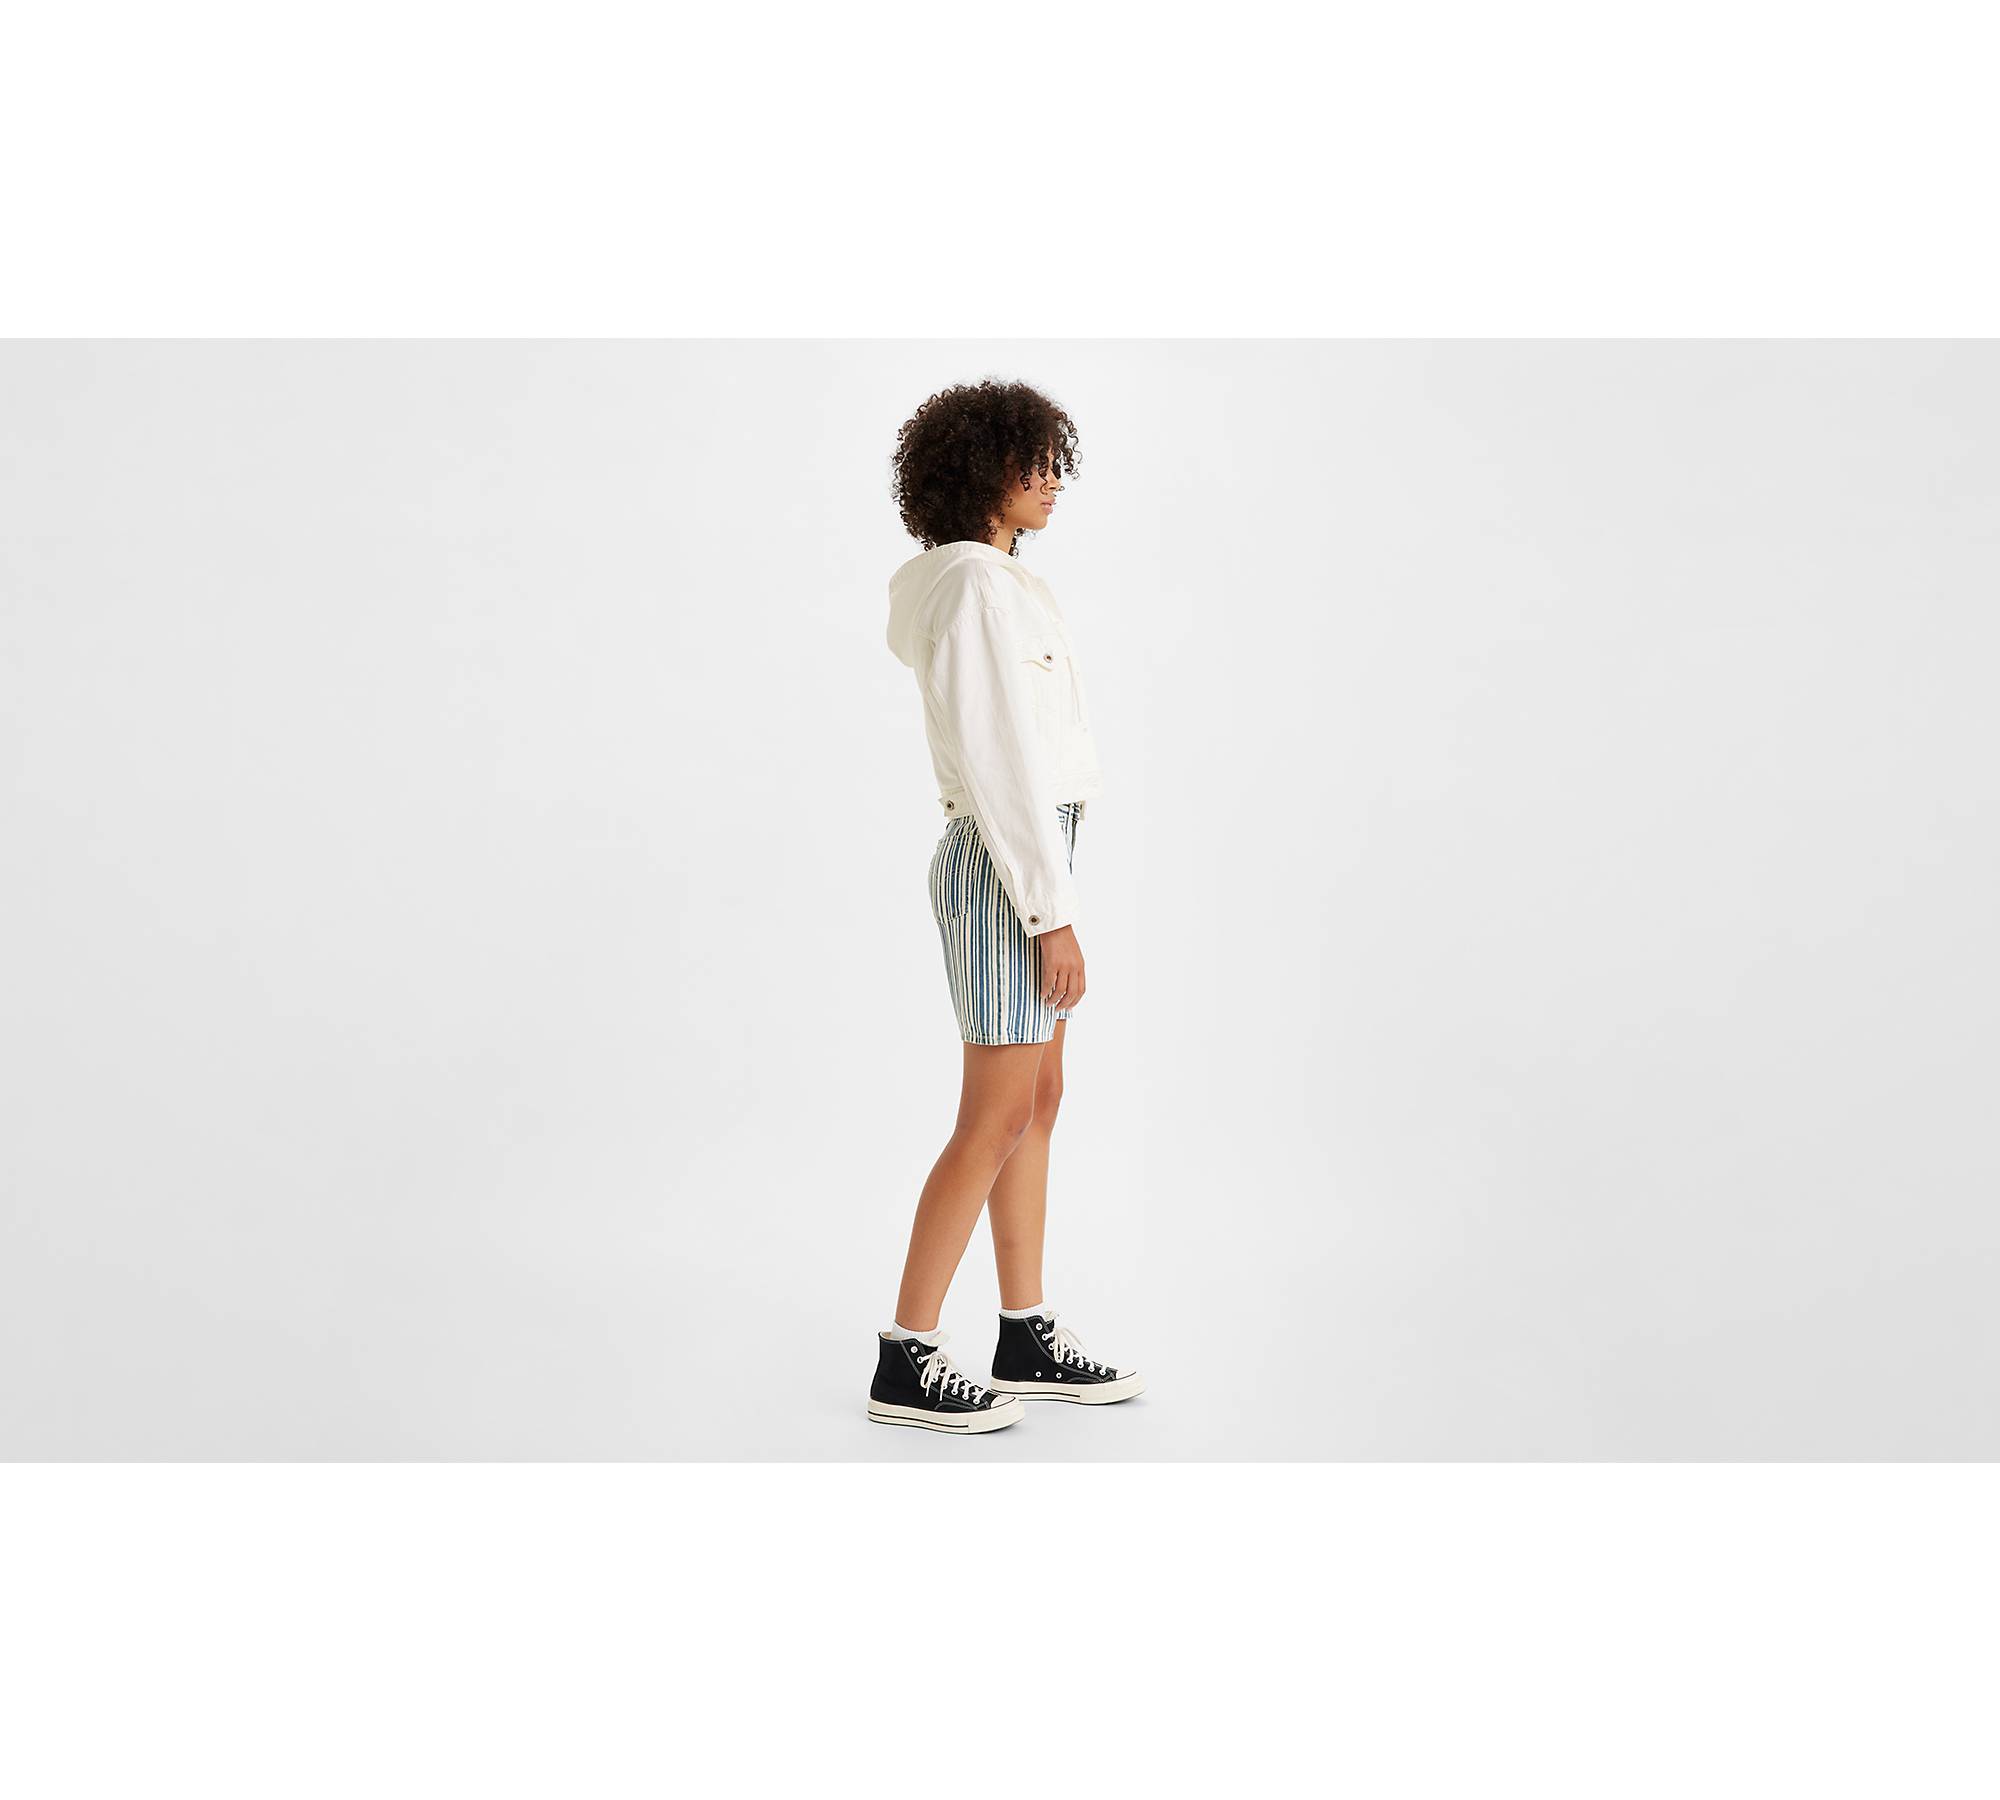 Silver Tab™ Baggy Women's Shorts - Multi-color | Levi's® US